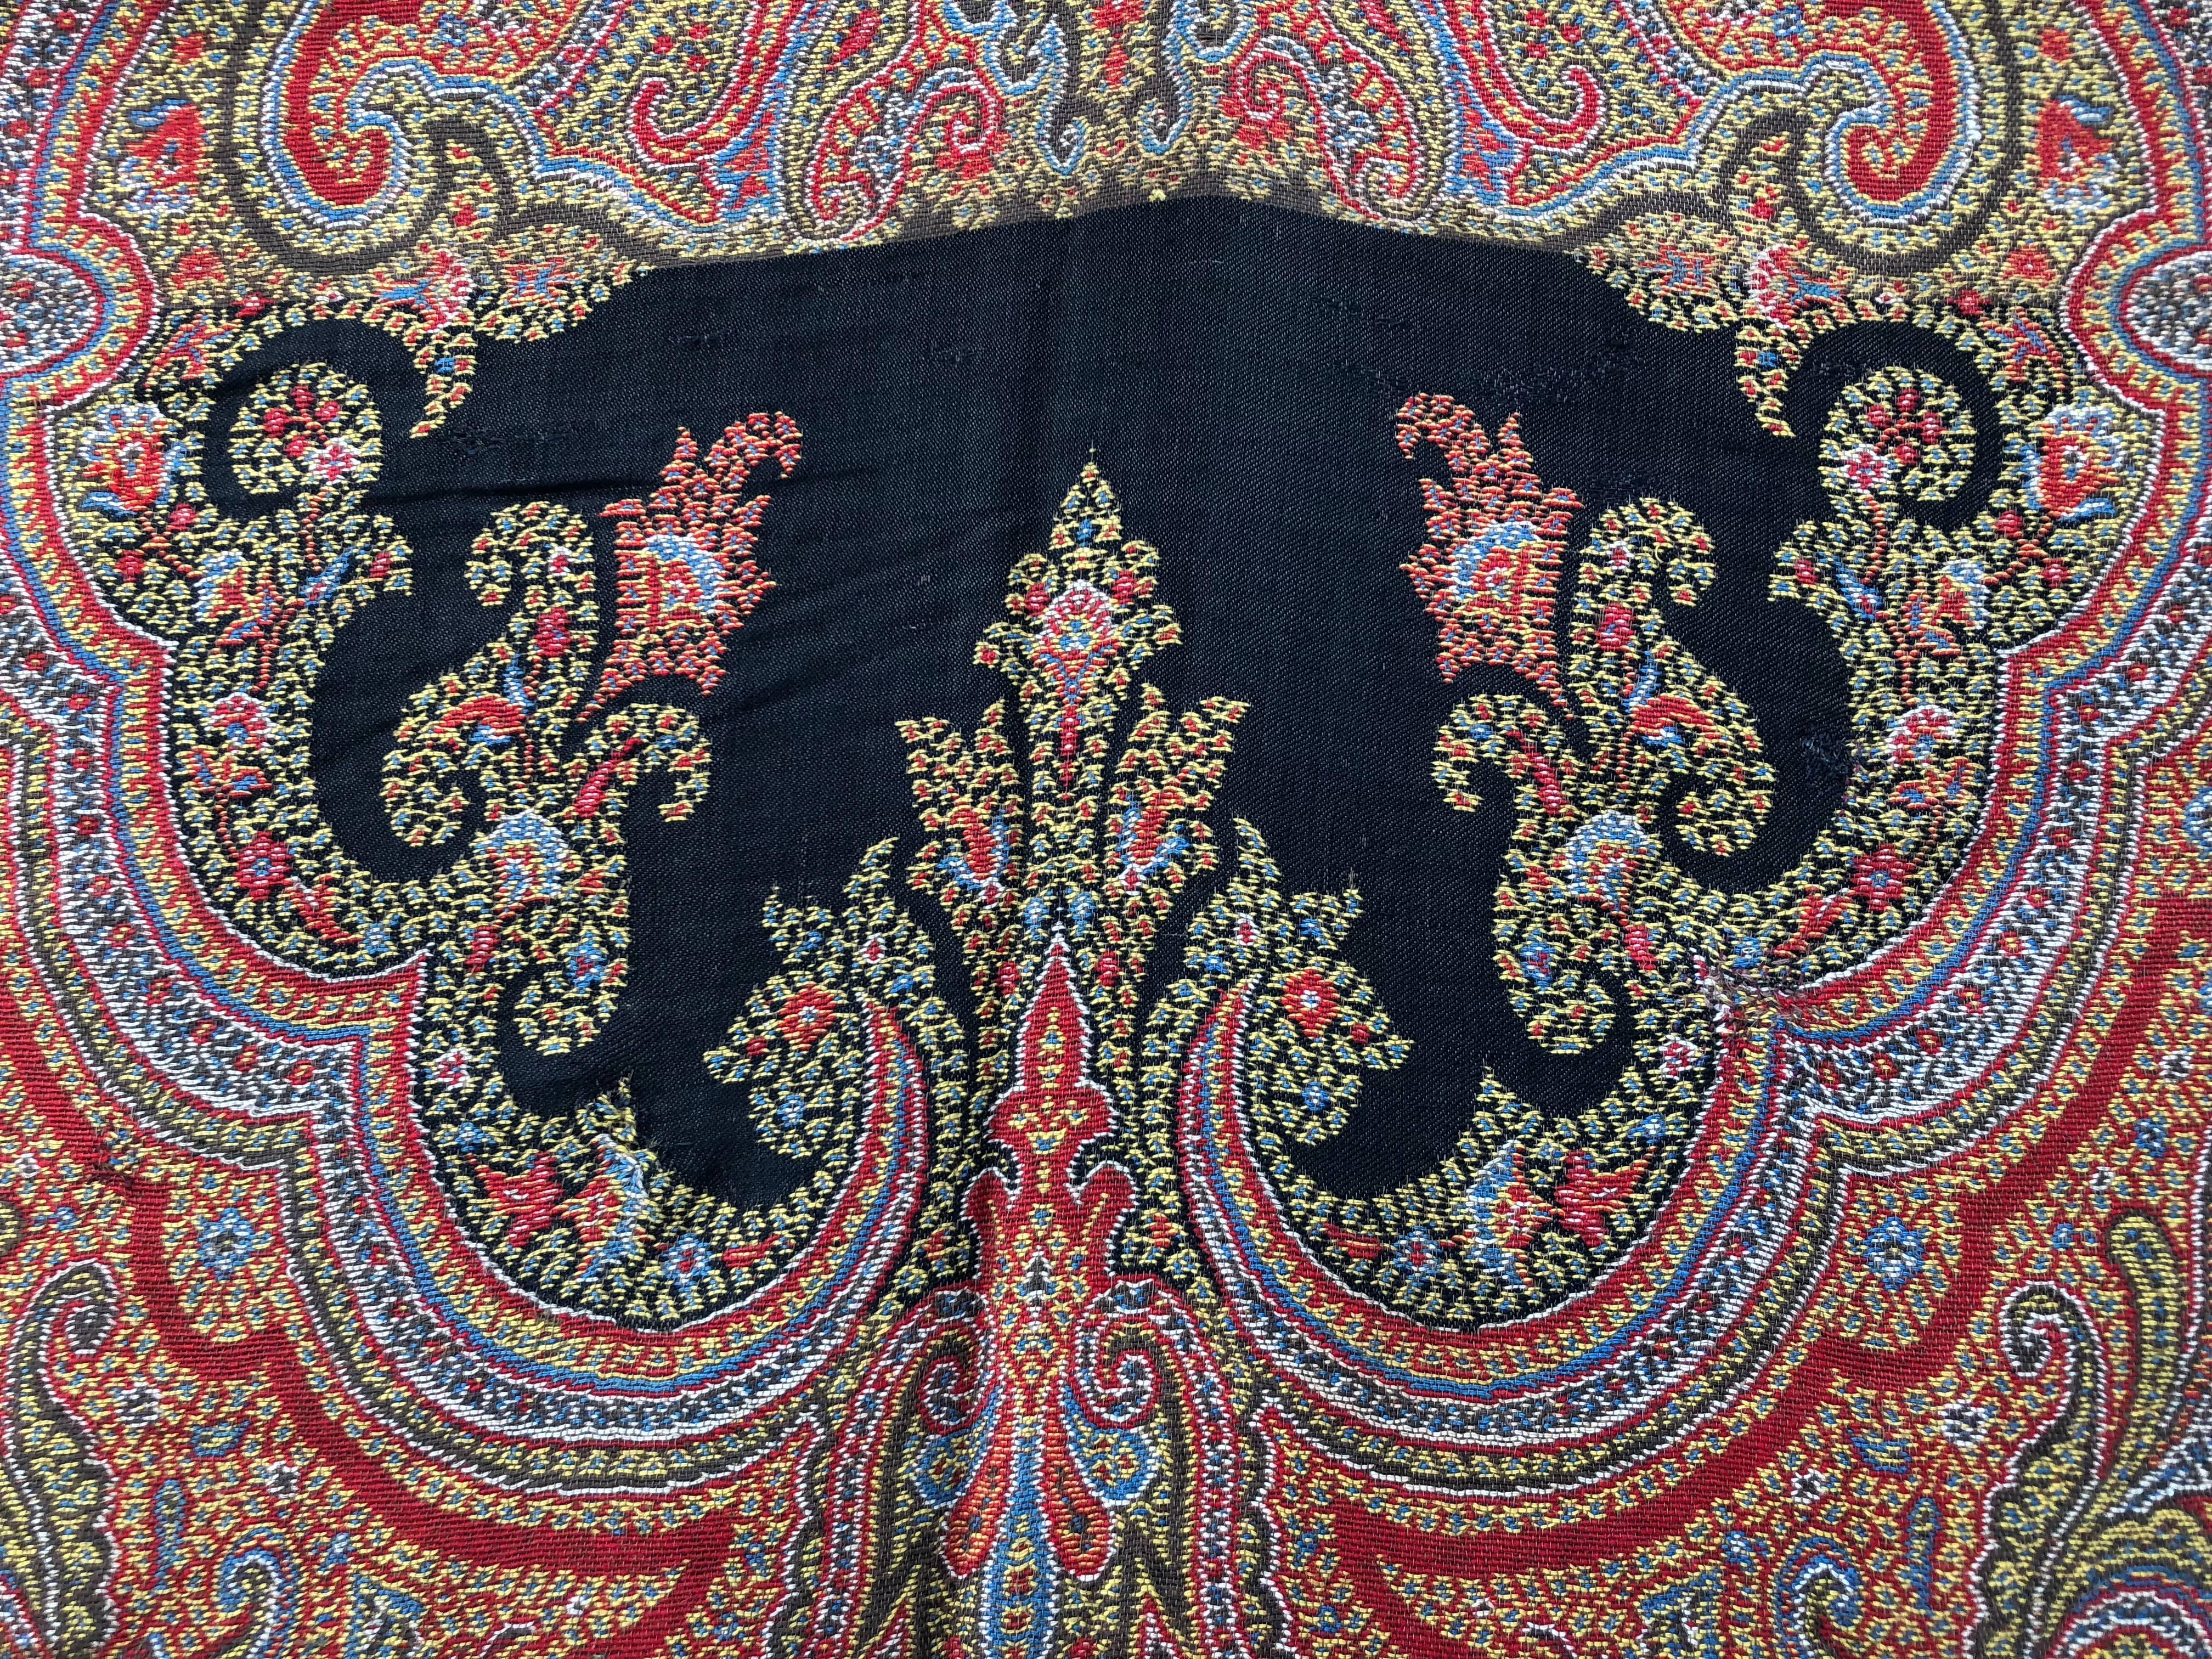 Hand Woven Paisley Kashmir Shawl with Long Fringe, Napoleon III In Good Condition For Sale In Petaluma, CA